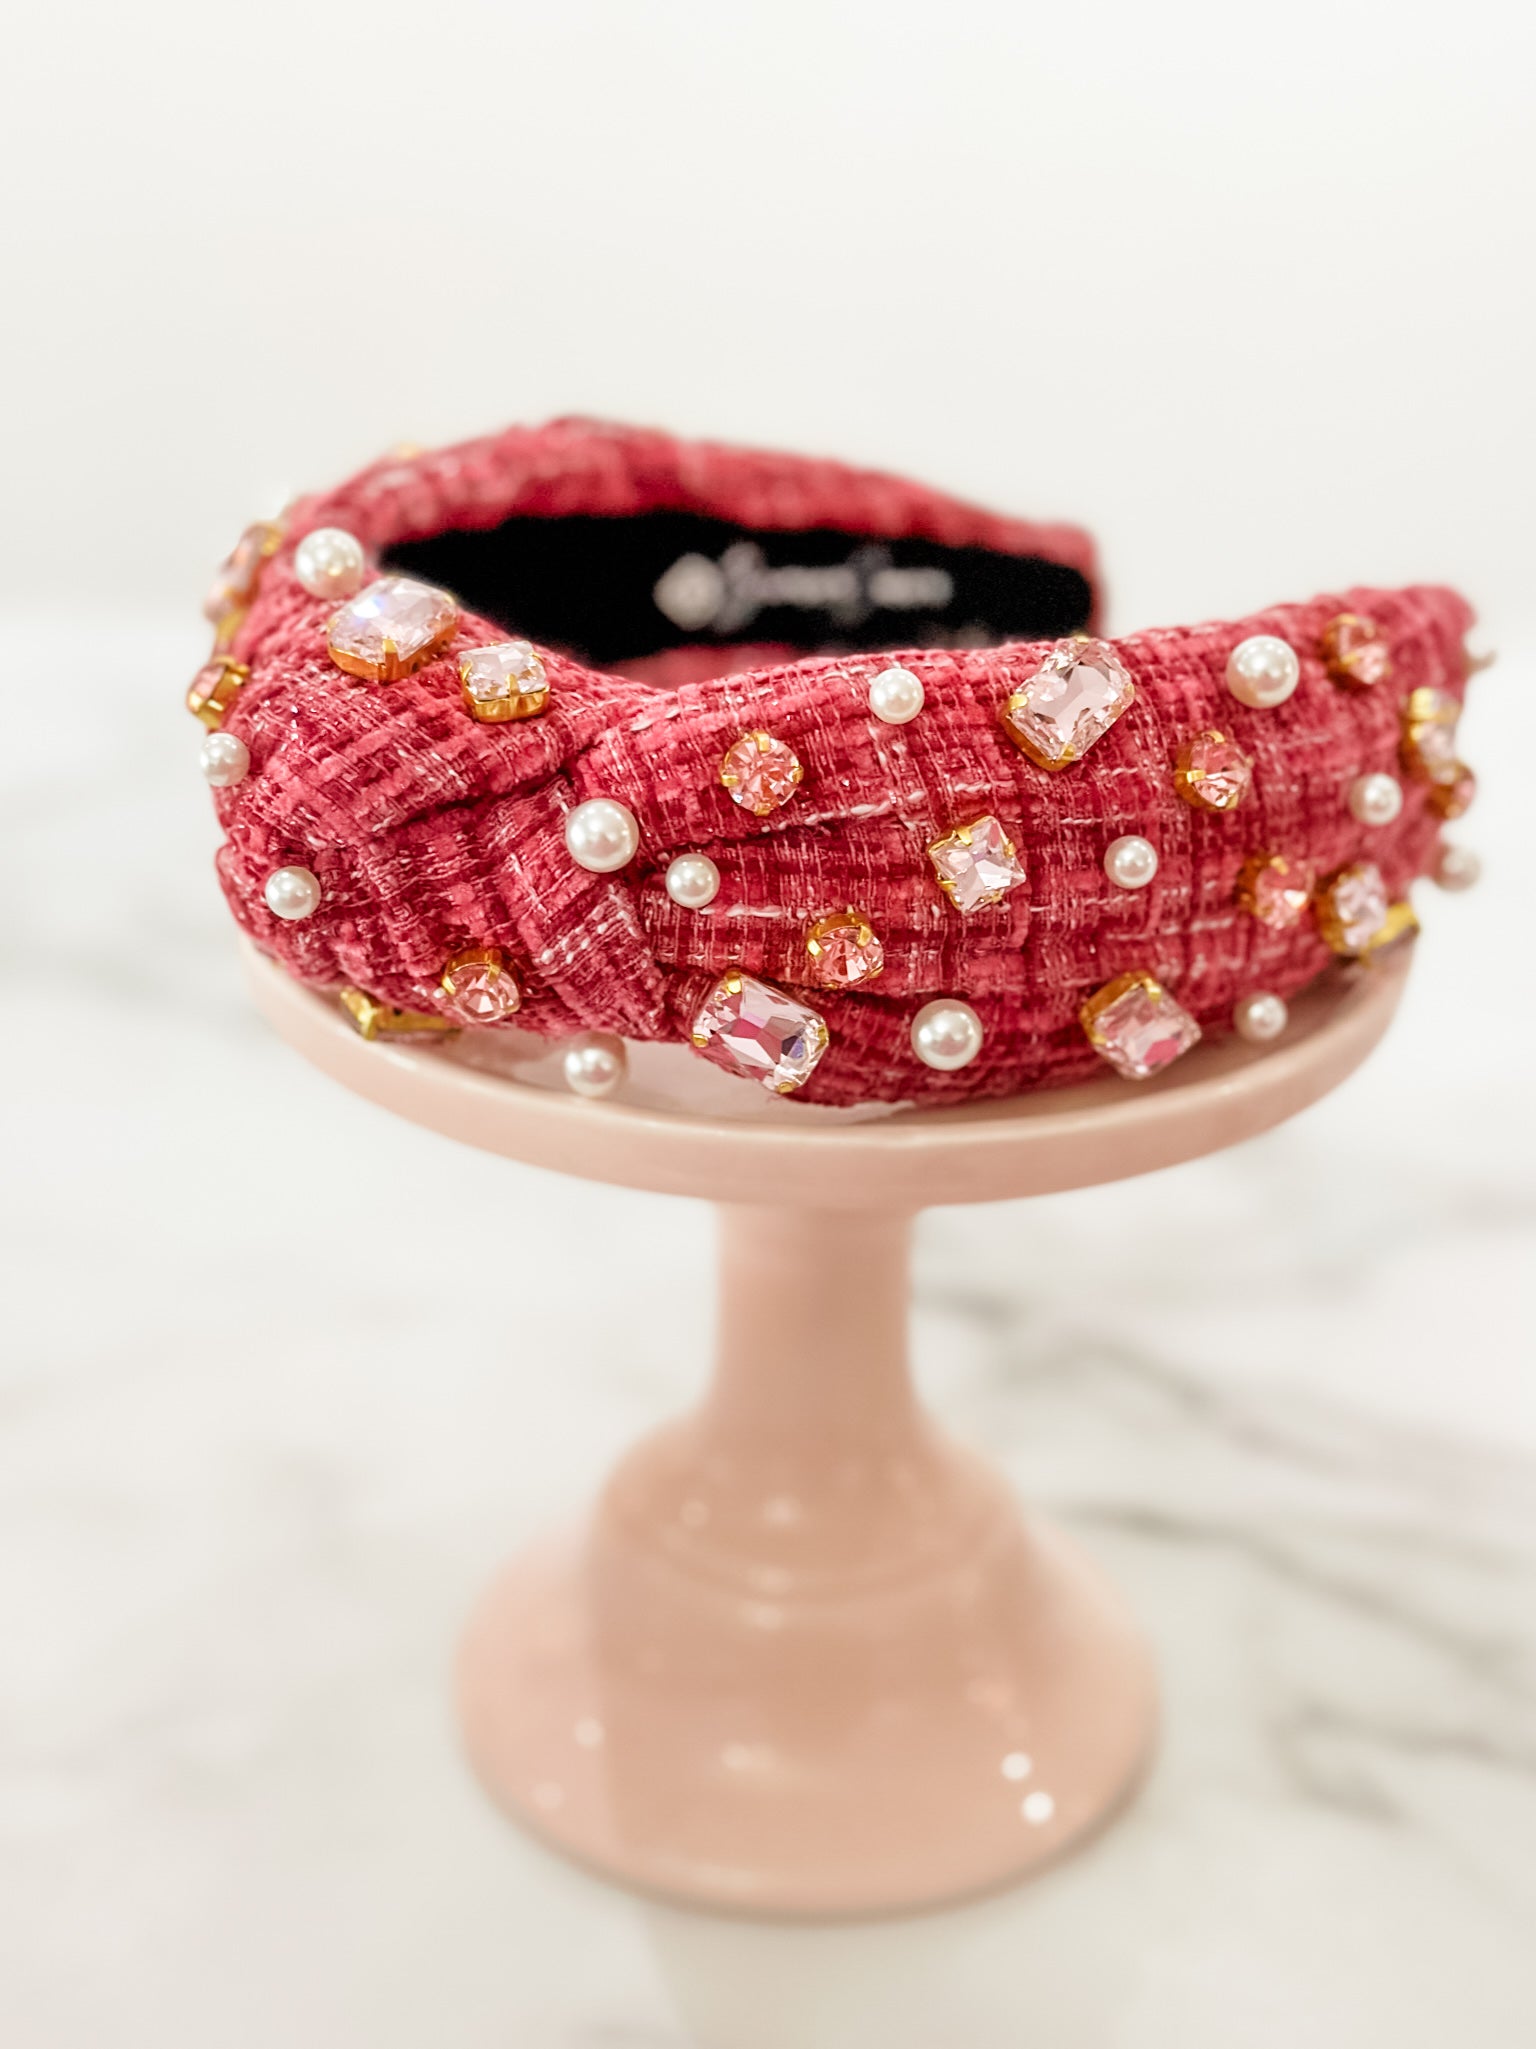 BRIANNA CANNON x Stylin Brunette - Maroon Tweed Headband with Blush Pink Crystals & Pearls